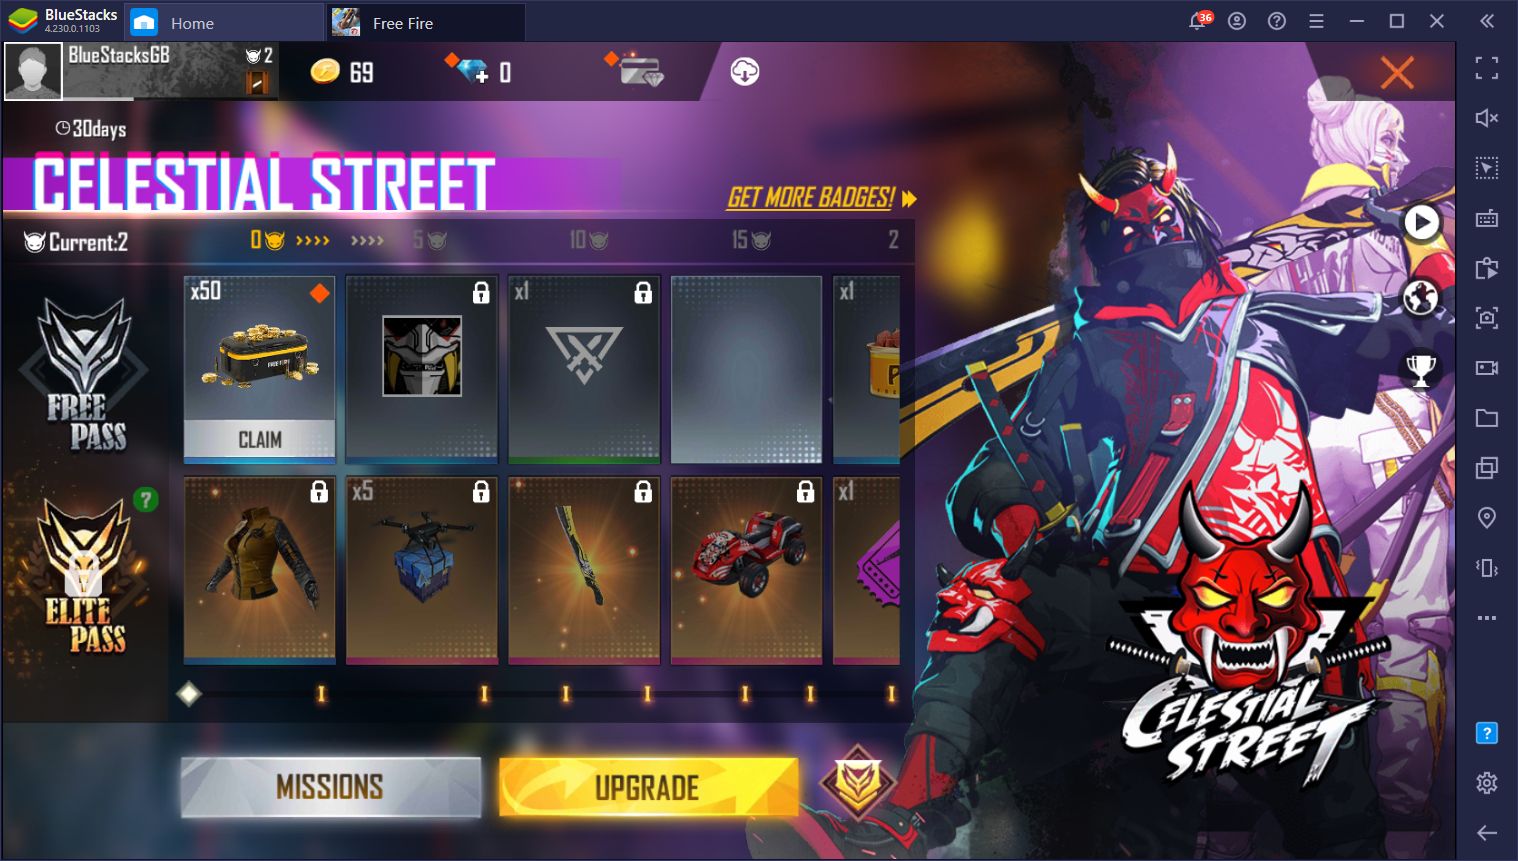 New Free Fire Celestial Street Elite Pass New Missions Rewards And Awesome Outfits Bluestacks